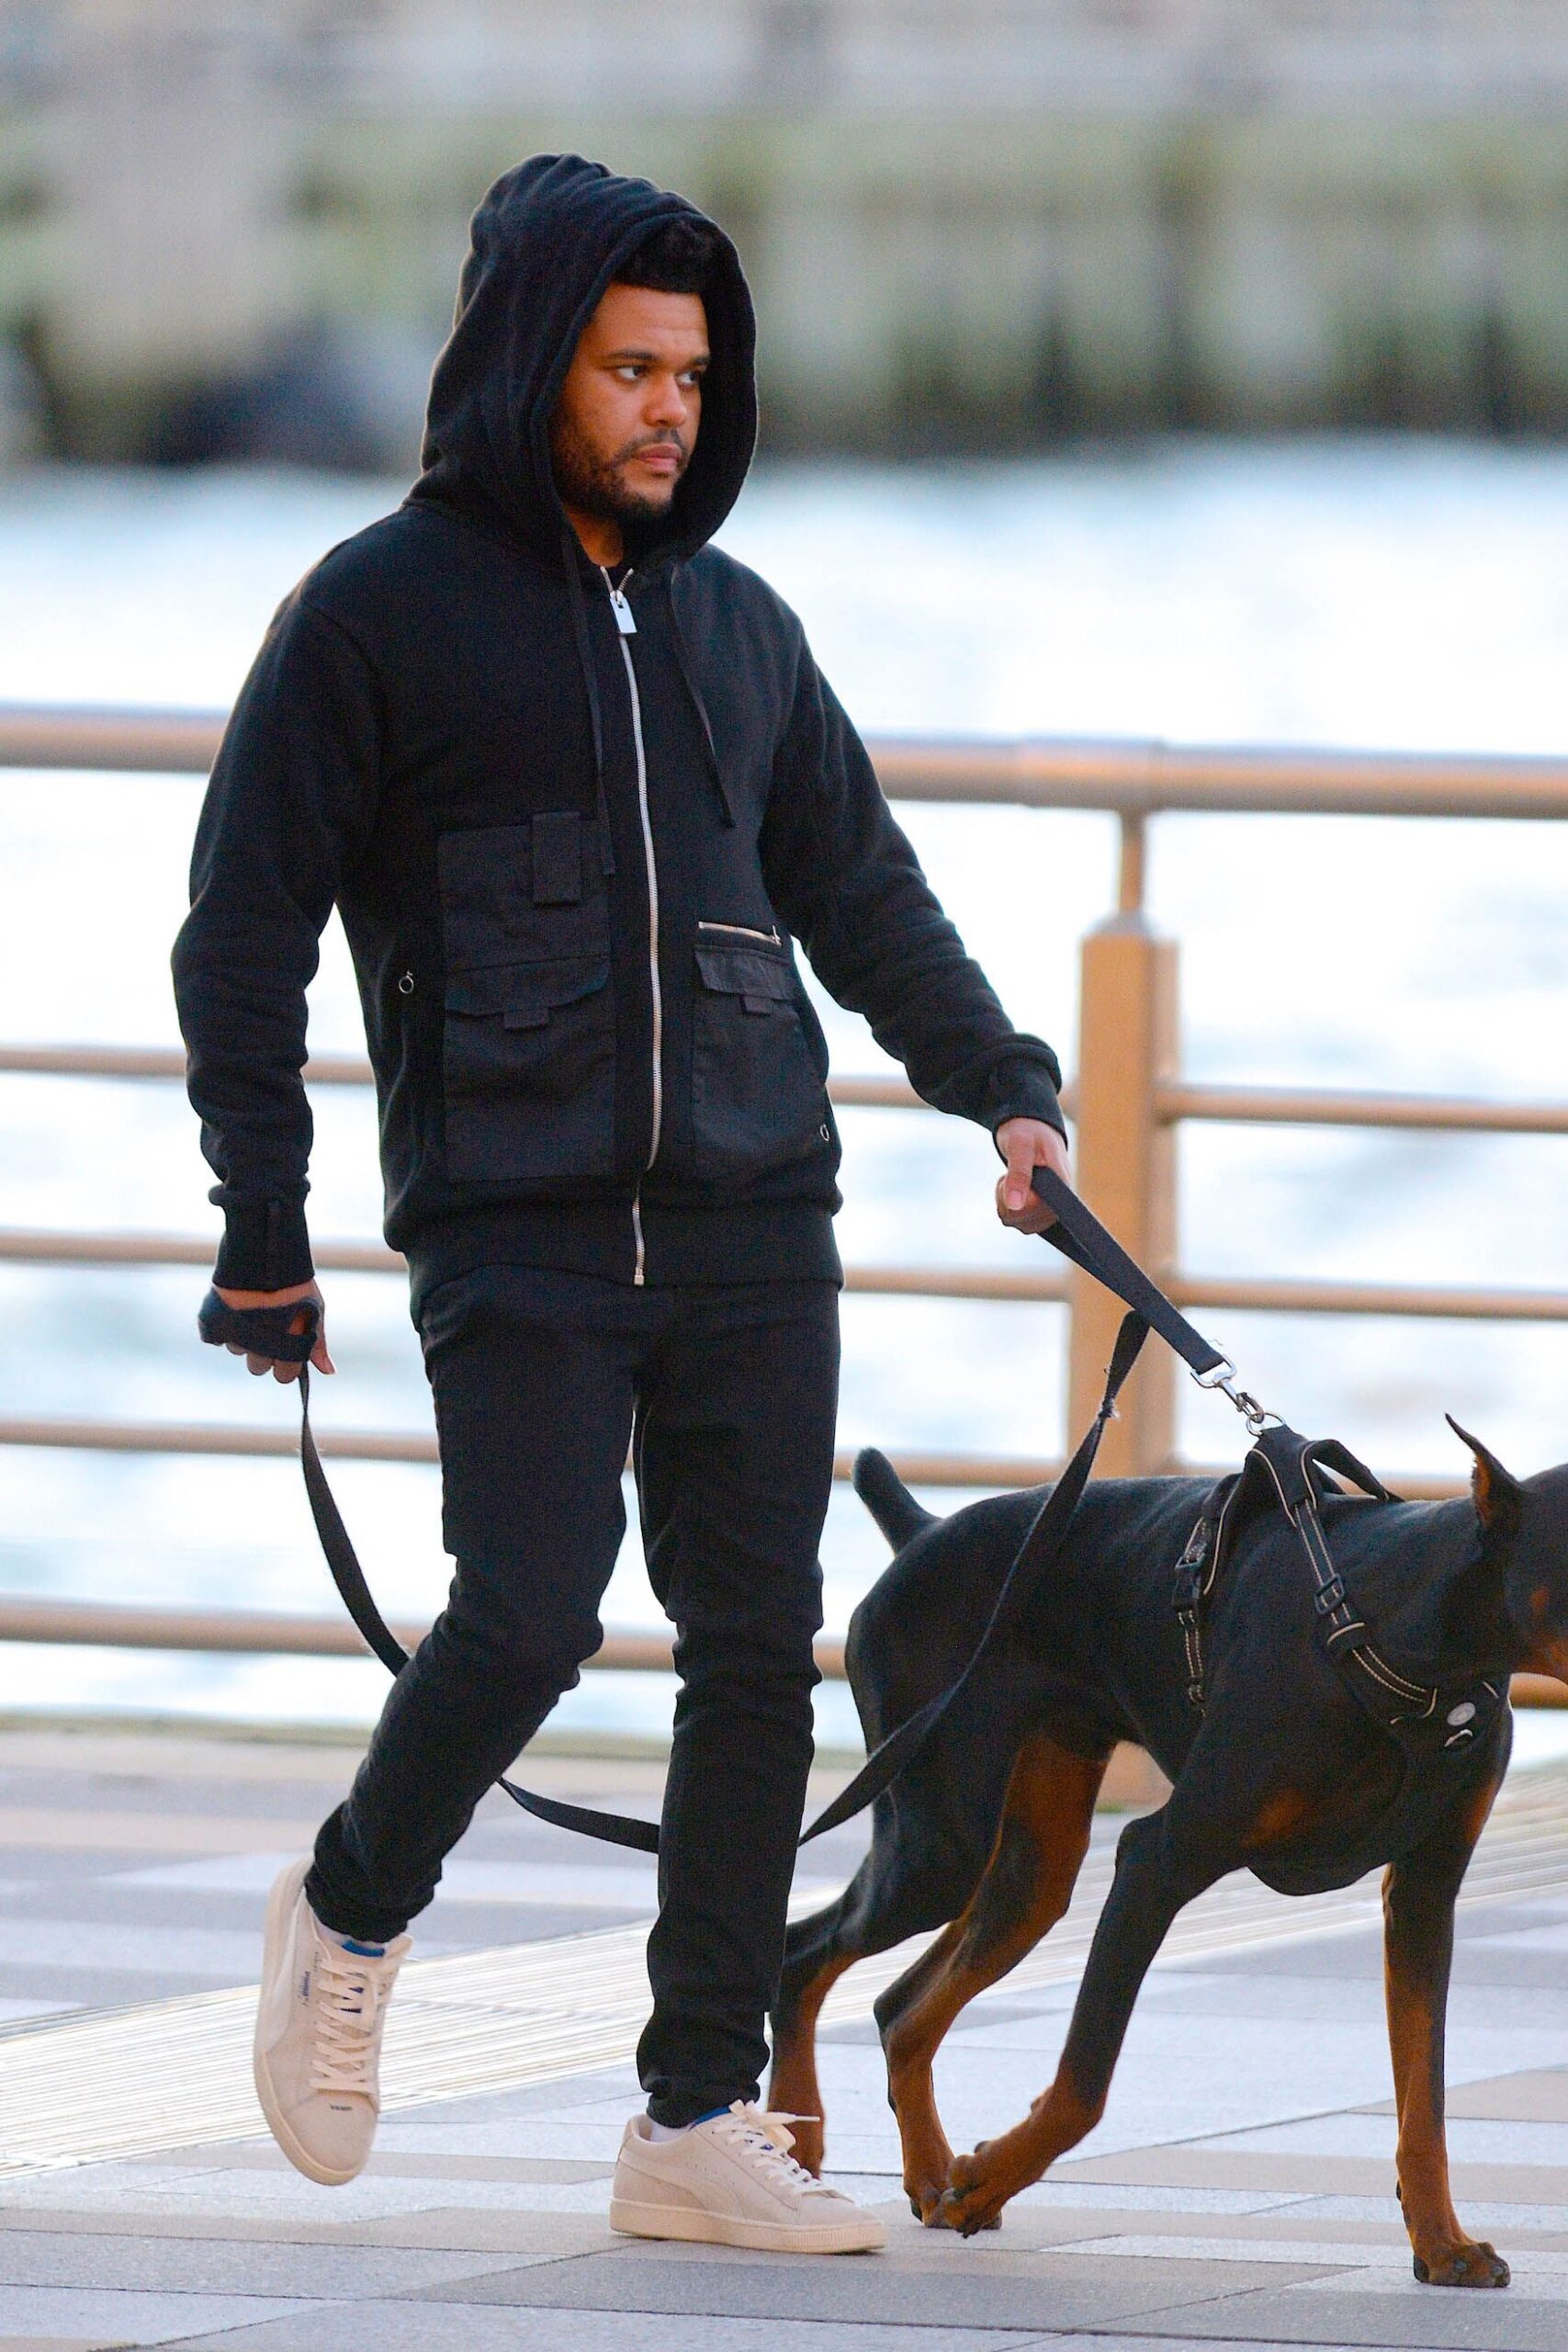 Dog Walk Outfits For Men